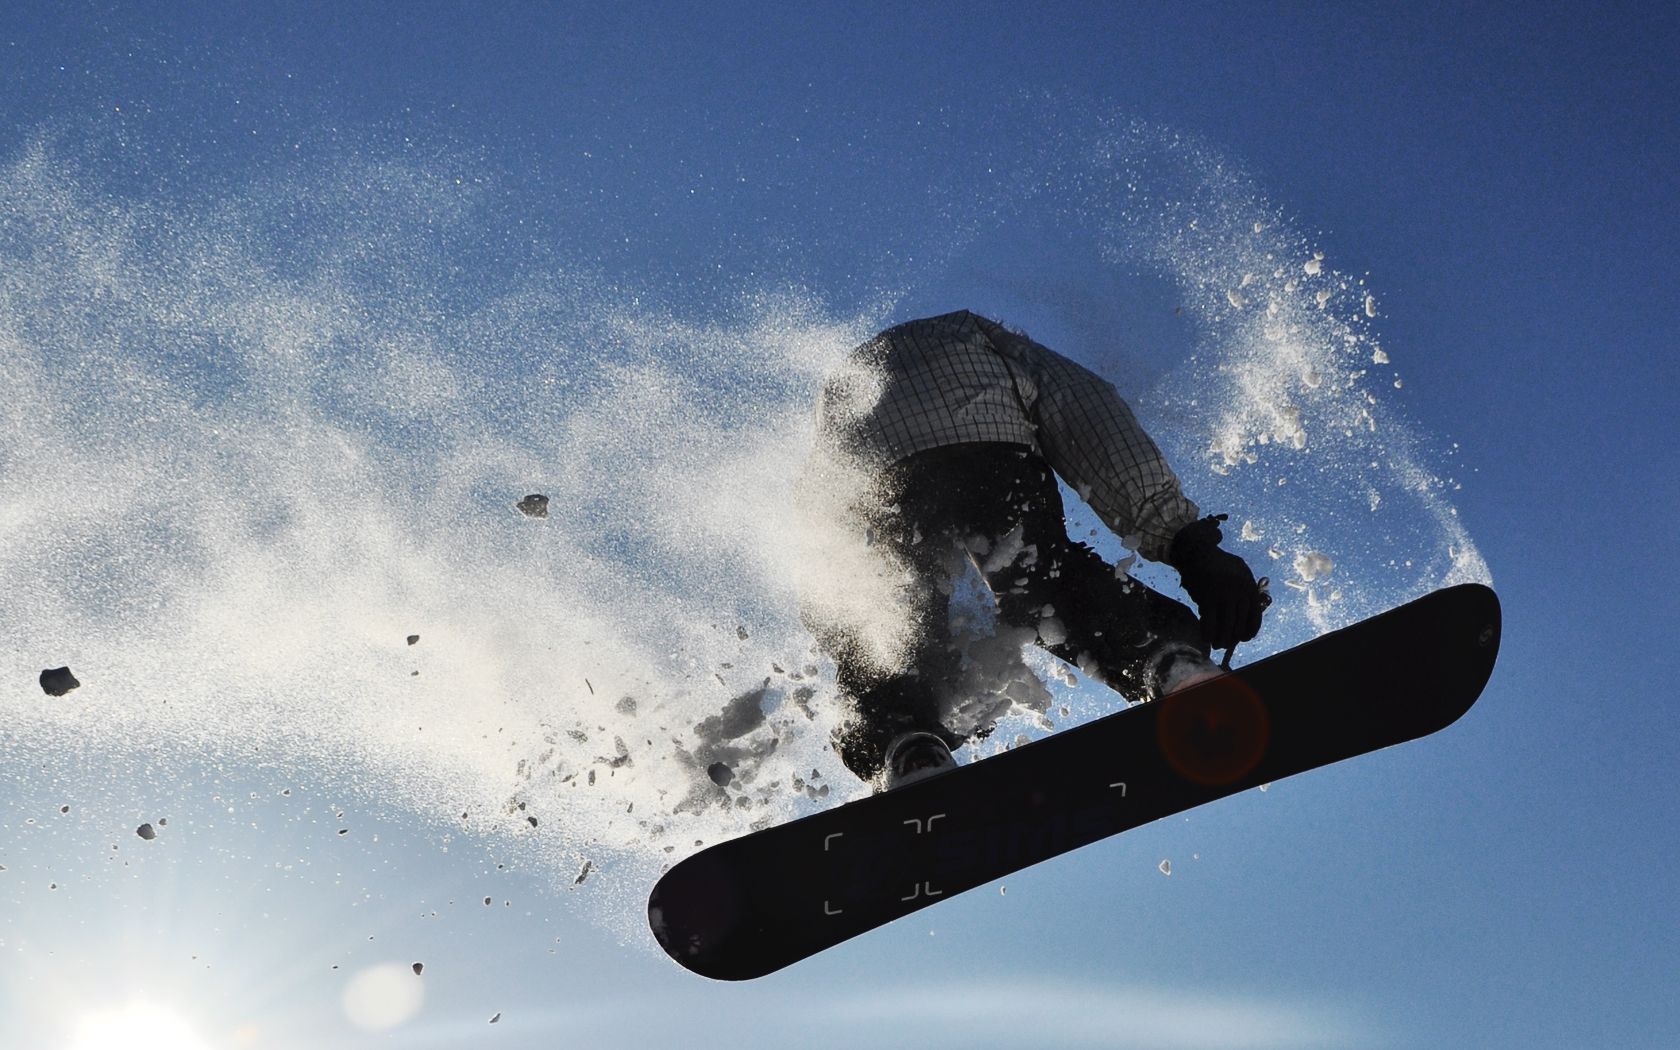 Snowboarding wallpaper - (#171660) - High Quality and Resolution ...